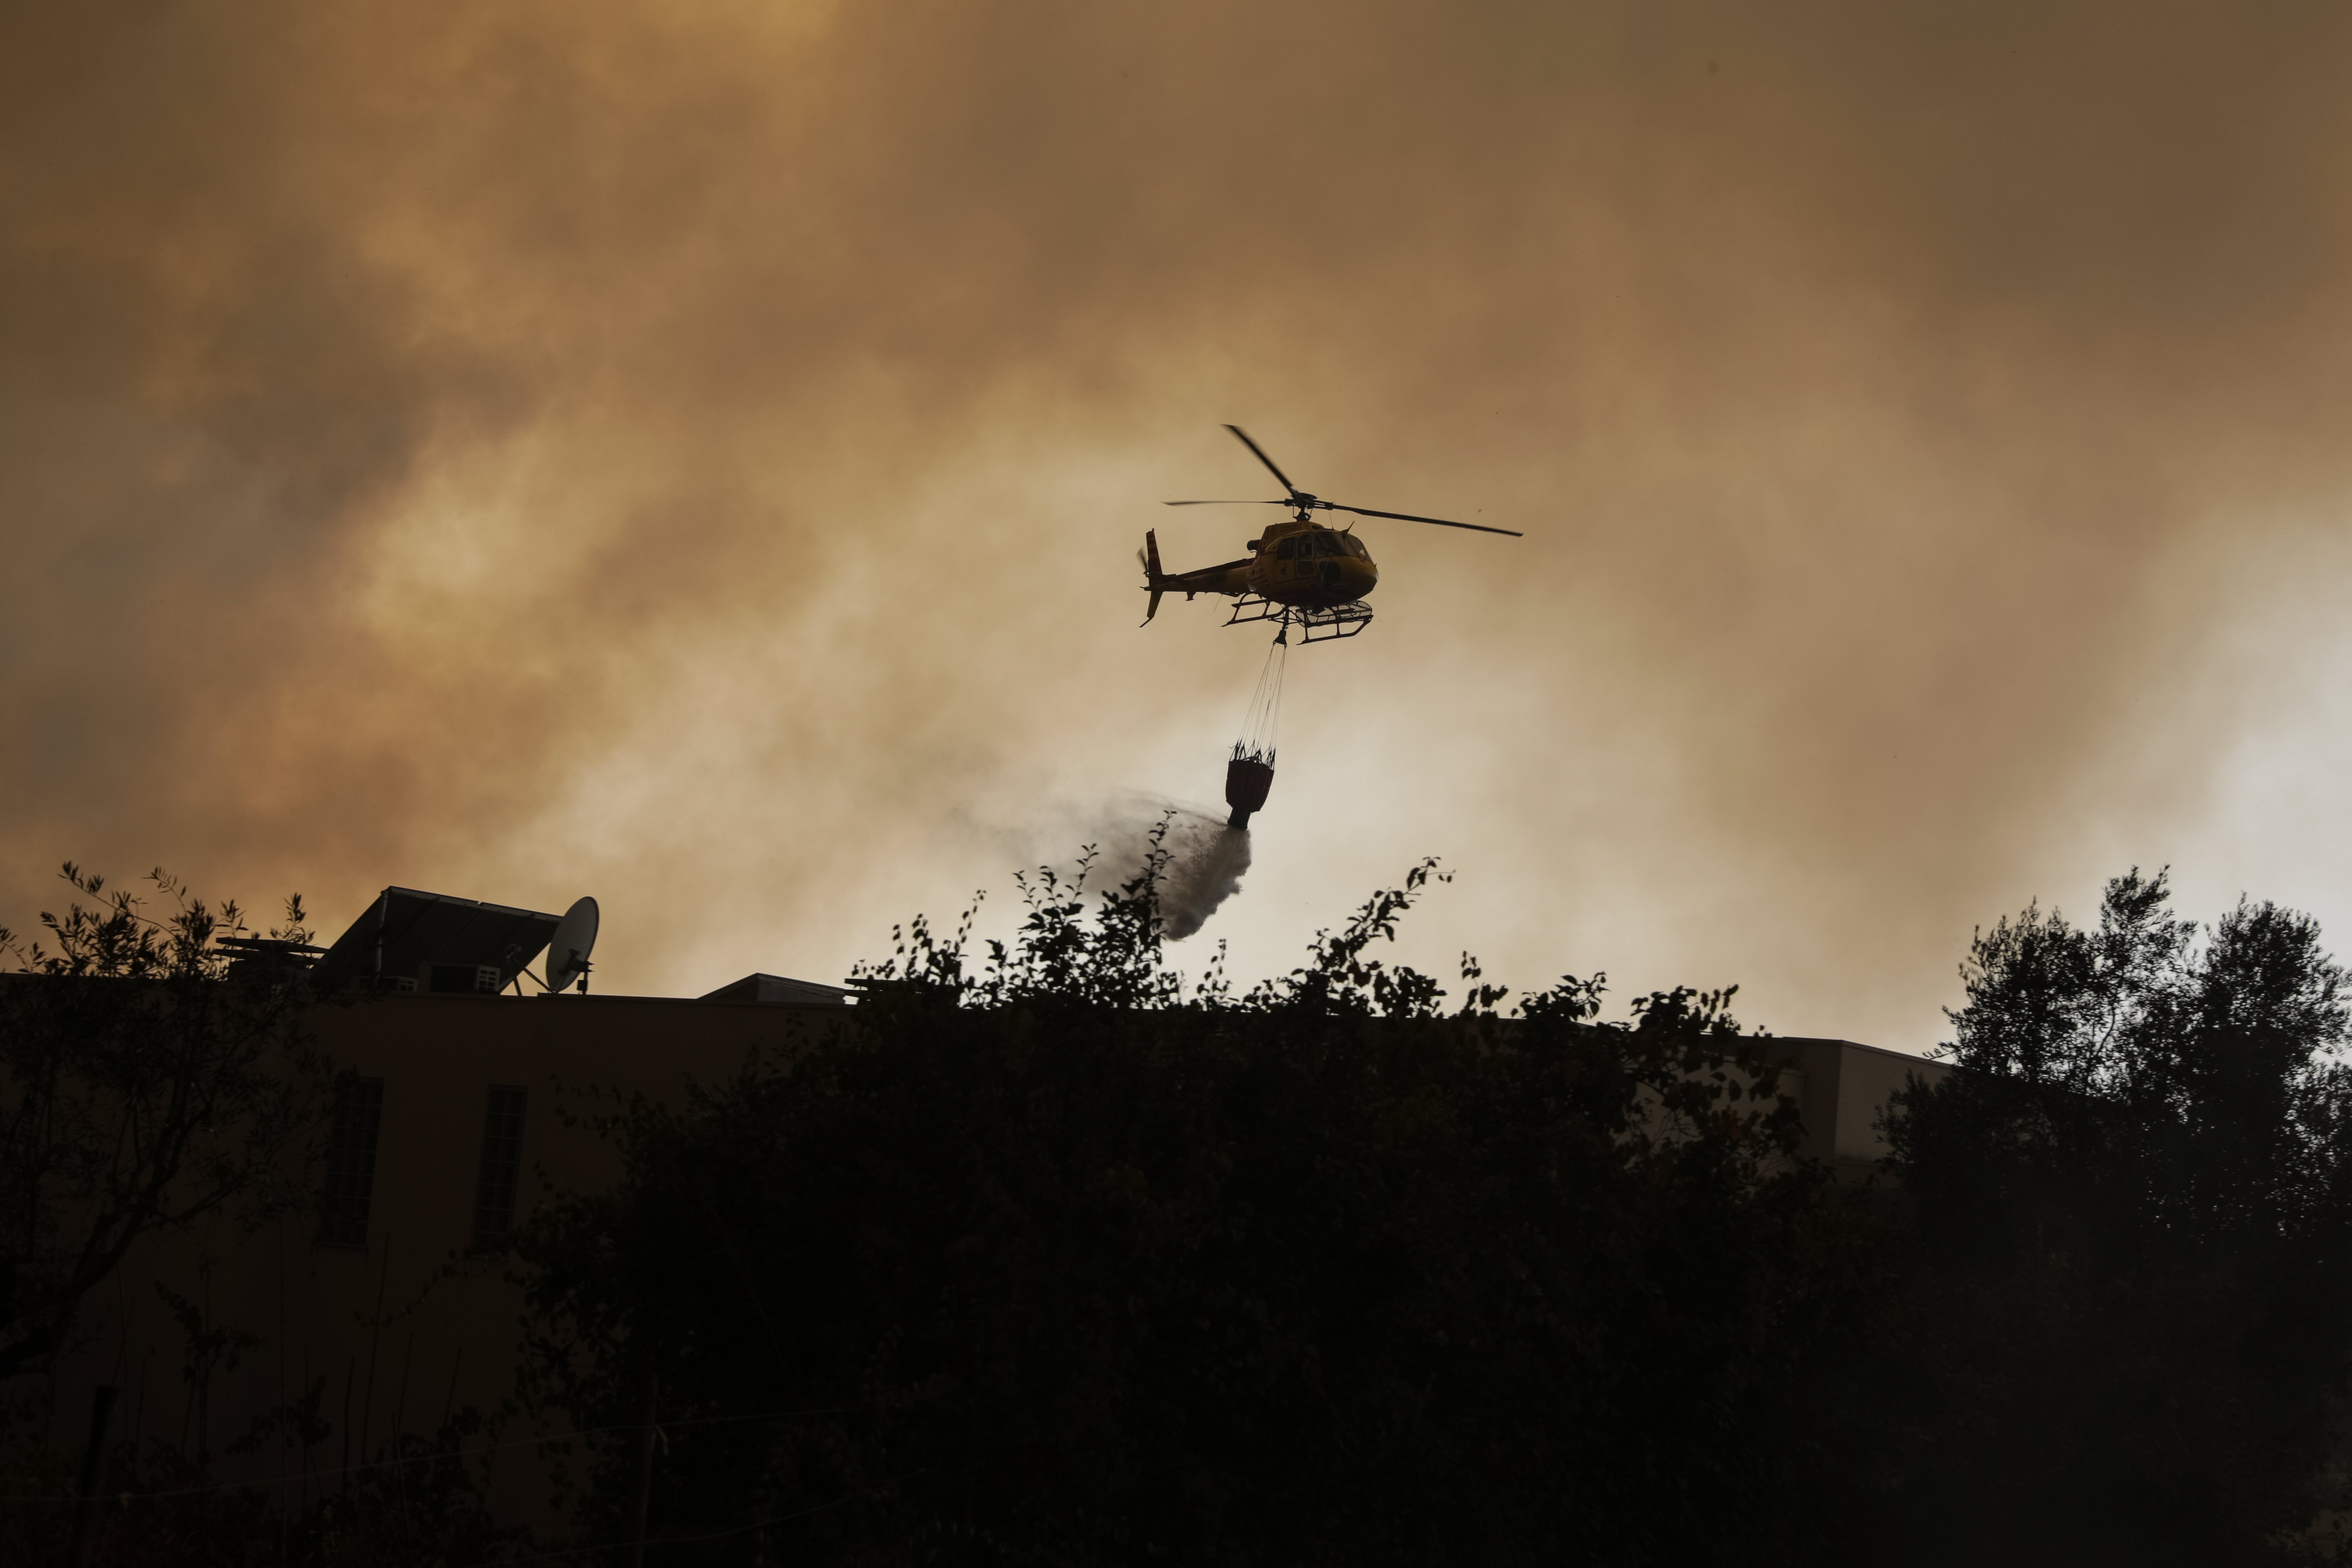 epa06267753 A helicopter fights a forest fire in Vila Cha, Lousa, Portugal, 15 October 2017. The National Civil Protection Authority (ANPC) said it 'was the worst day of the year in terms of fires,' having exceeded 300 forest fires.  EPA/PAULO NOVAIS